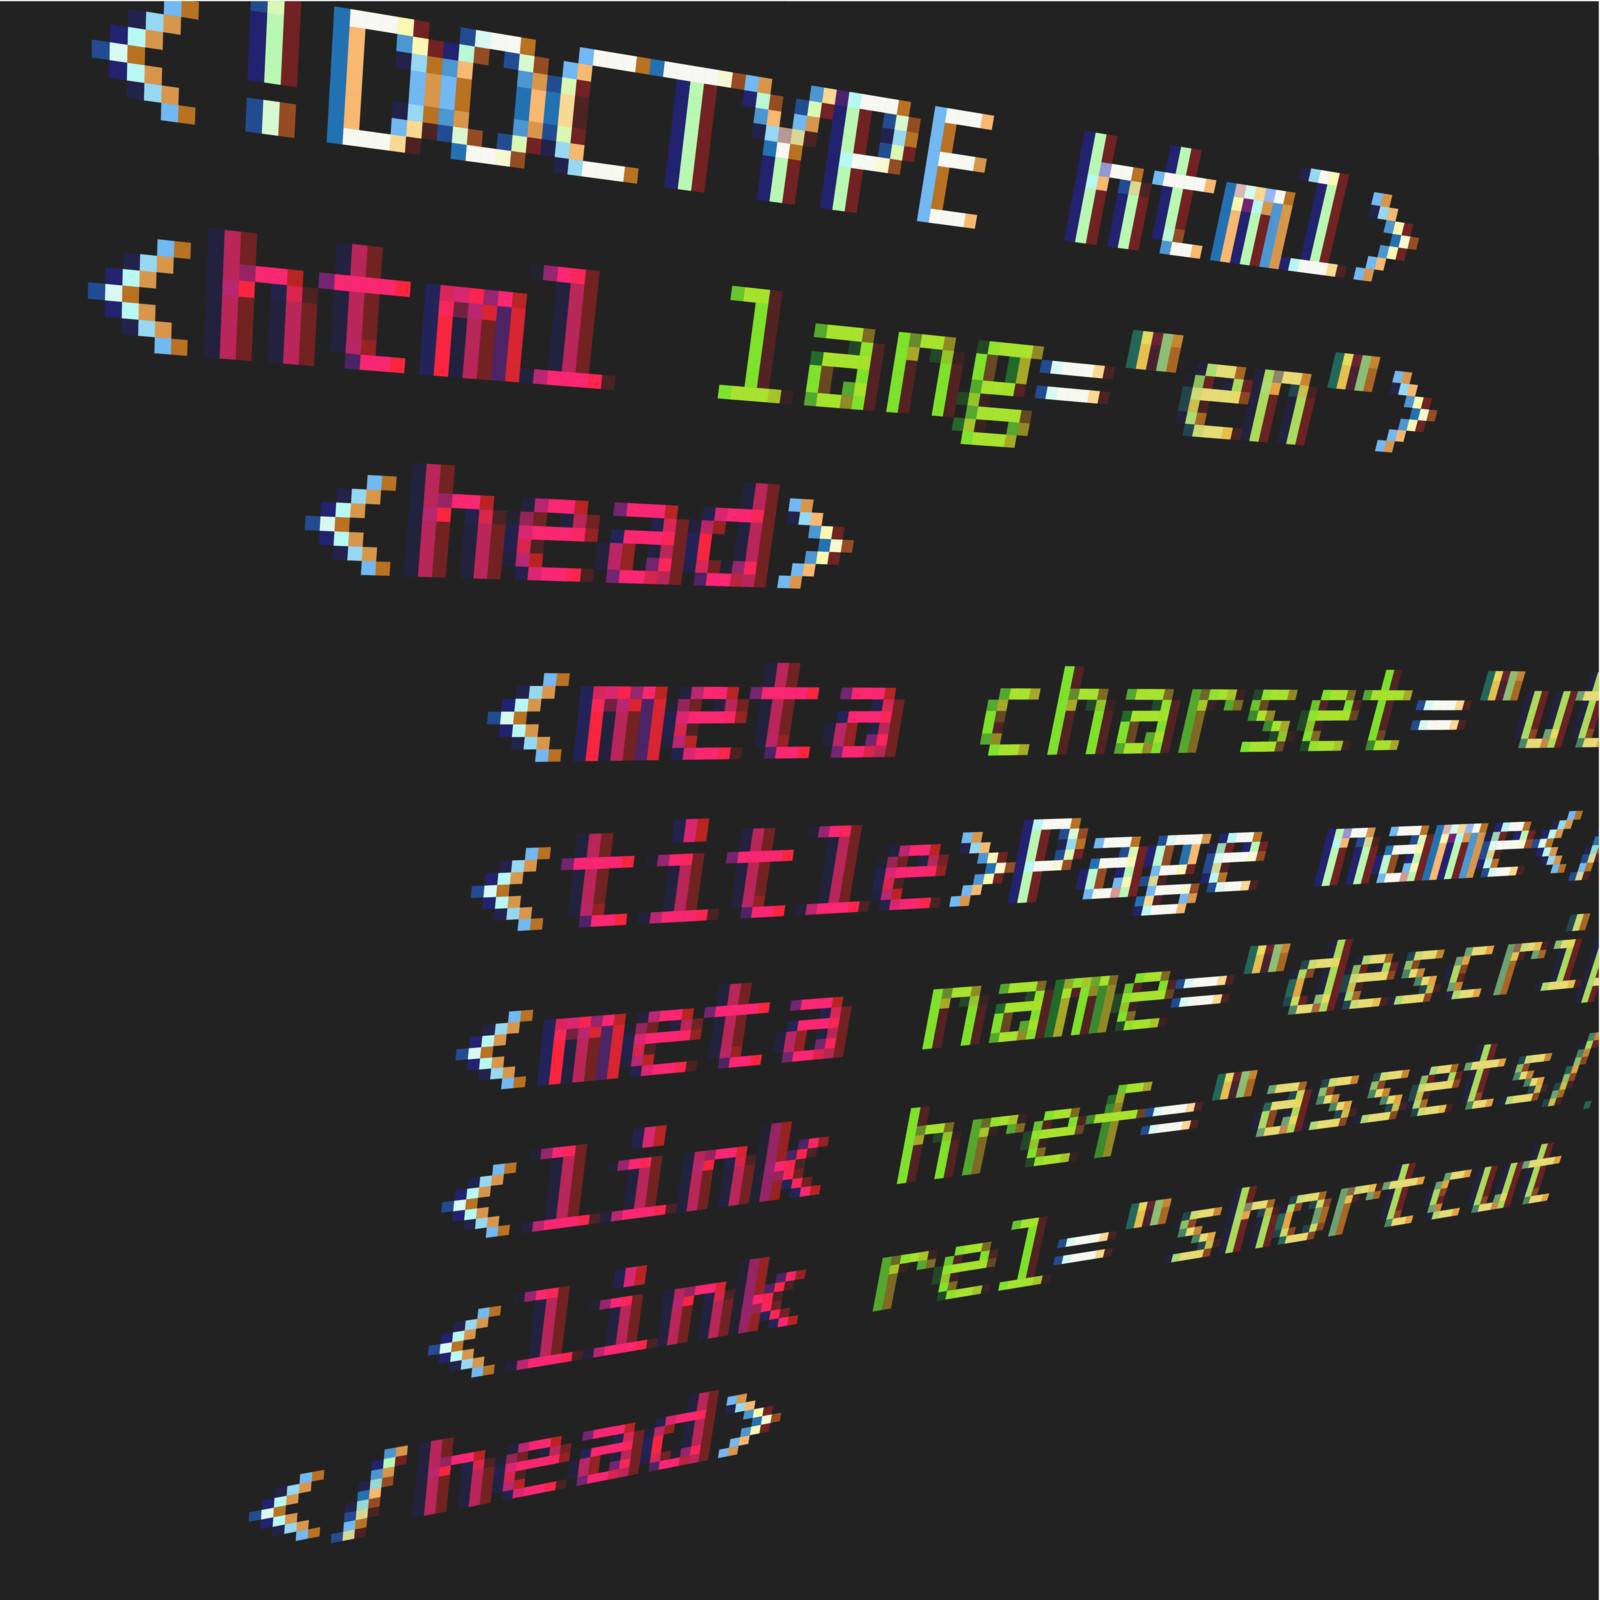 CSS and HTML code by vtorous